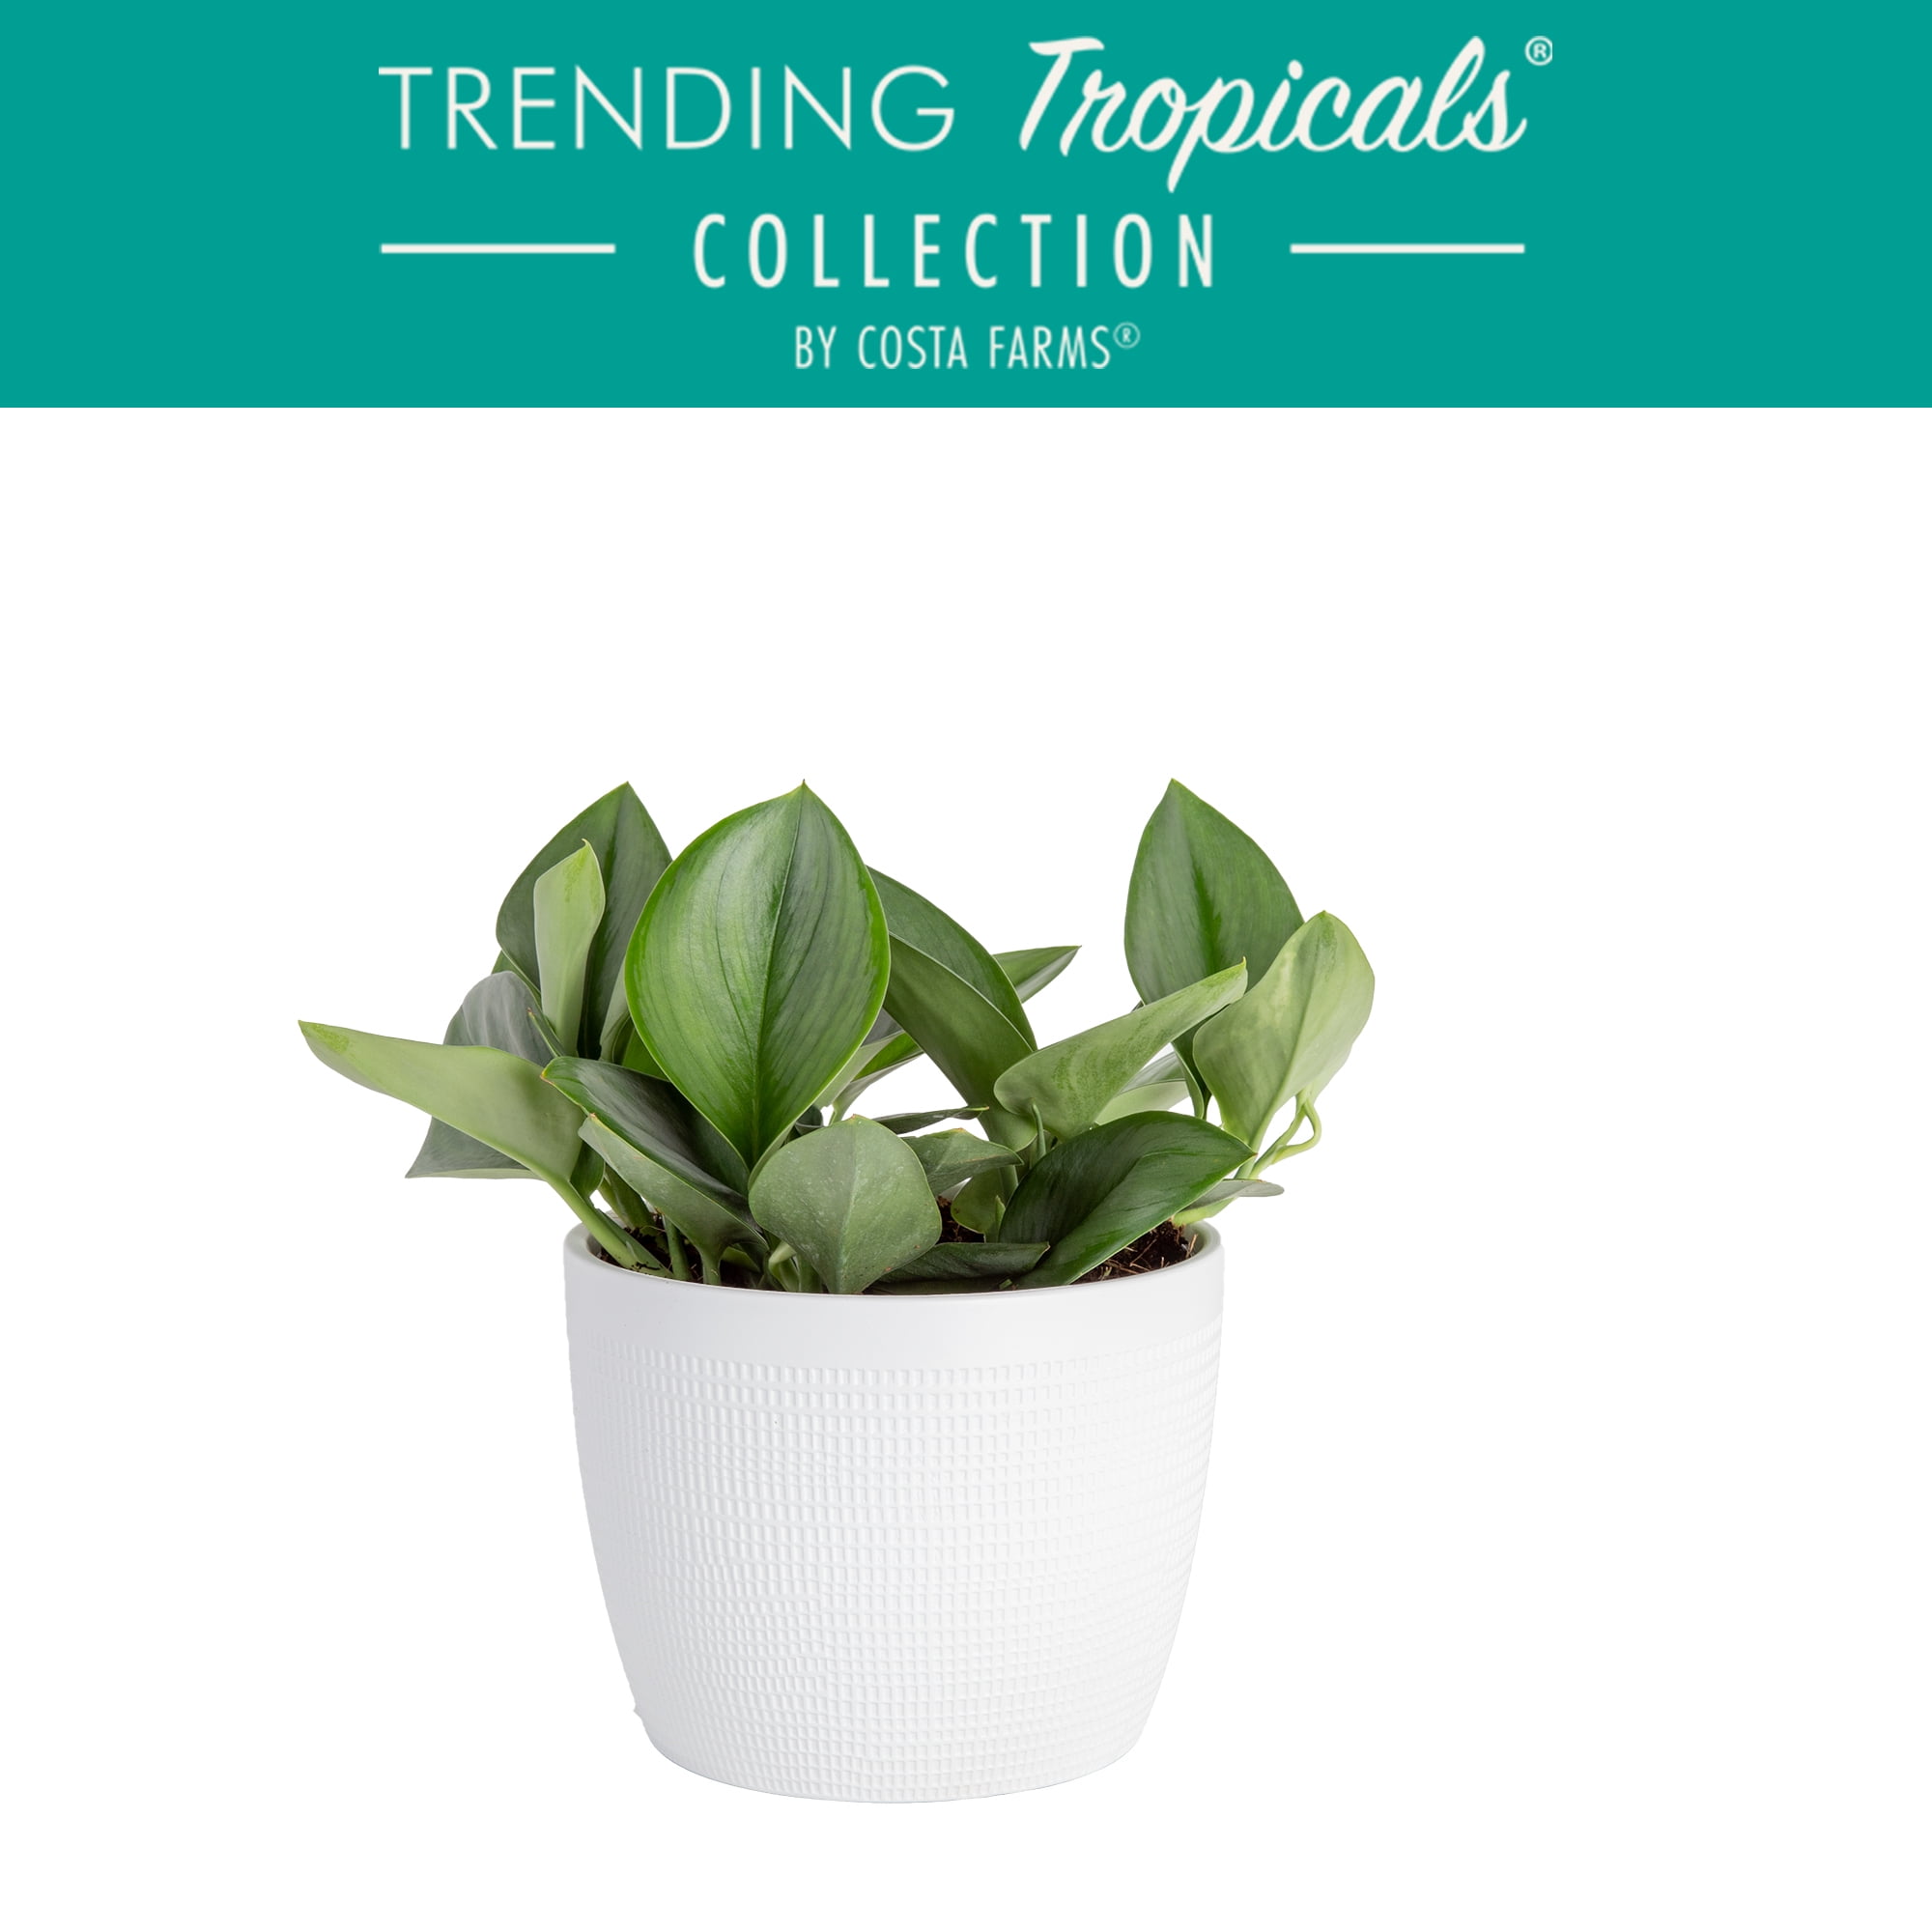 Costa Farms Live Indoor 15in. Tall Green Trending Tropicals Sterling Silver Scindapsus; Bright, Indirect Sunlight Plant in 6in. Ceramic Planter